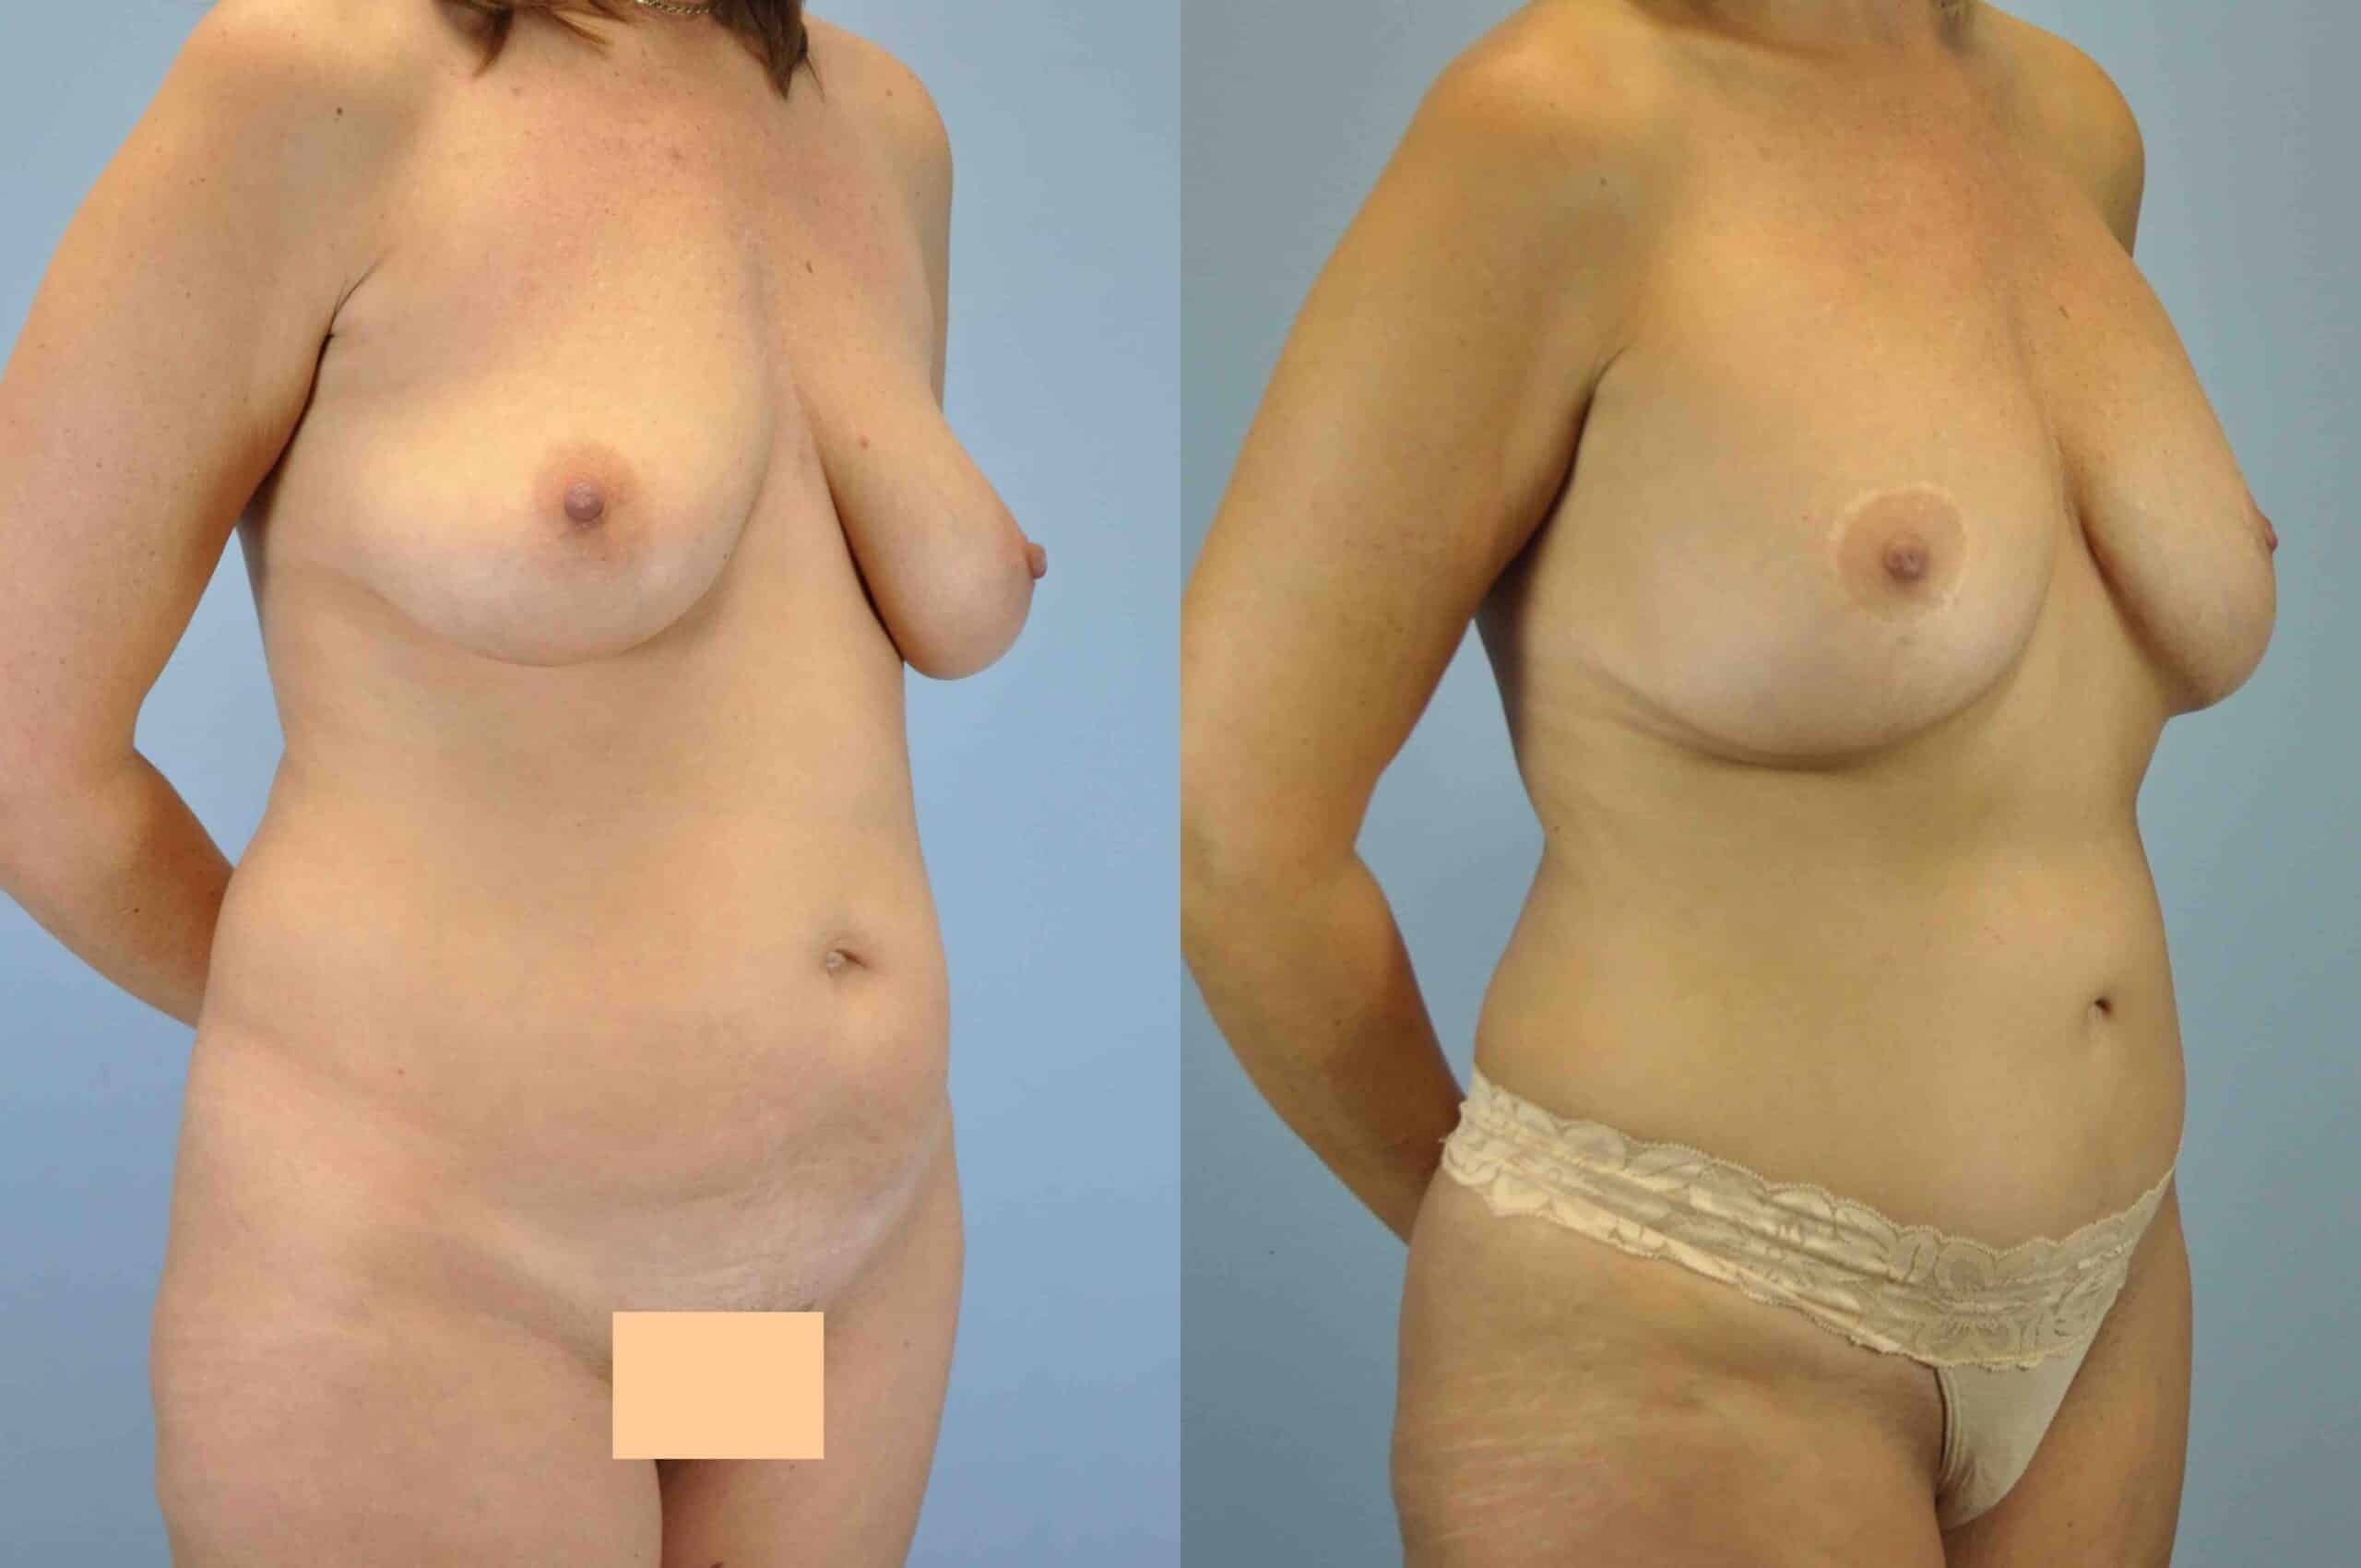 Before and after, 5 yr post op from Tummy Tuck, VASER Abdomen, Flanks, and Mons, Mastopexy/Breast Lift, Breast Augmentation performed by Dr. Paul Vanek (diagonal view)